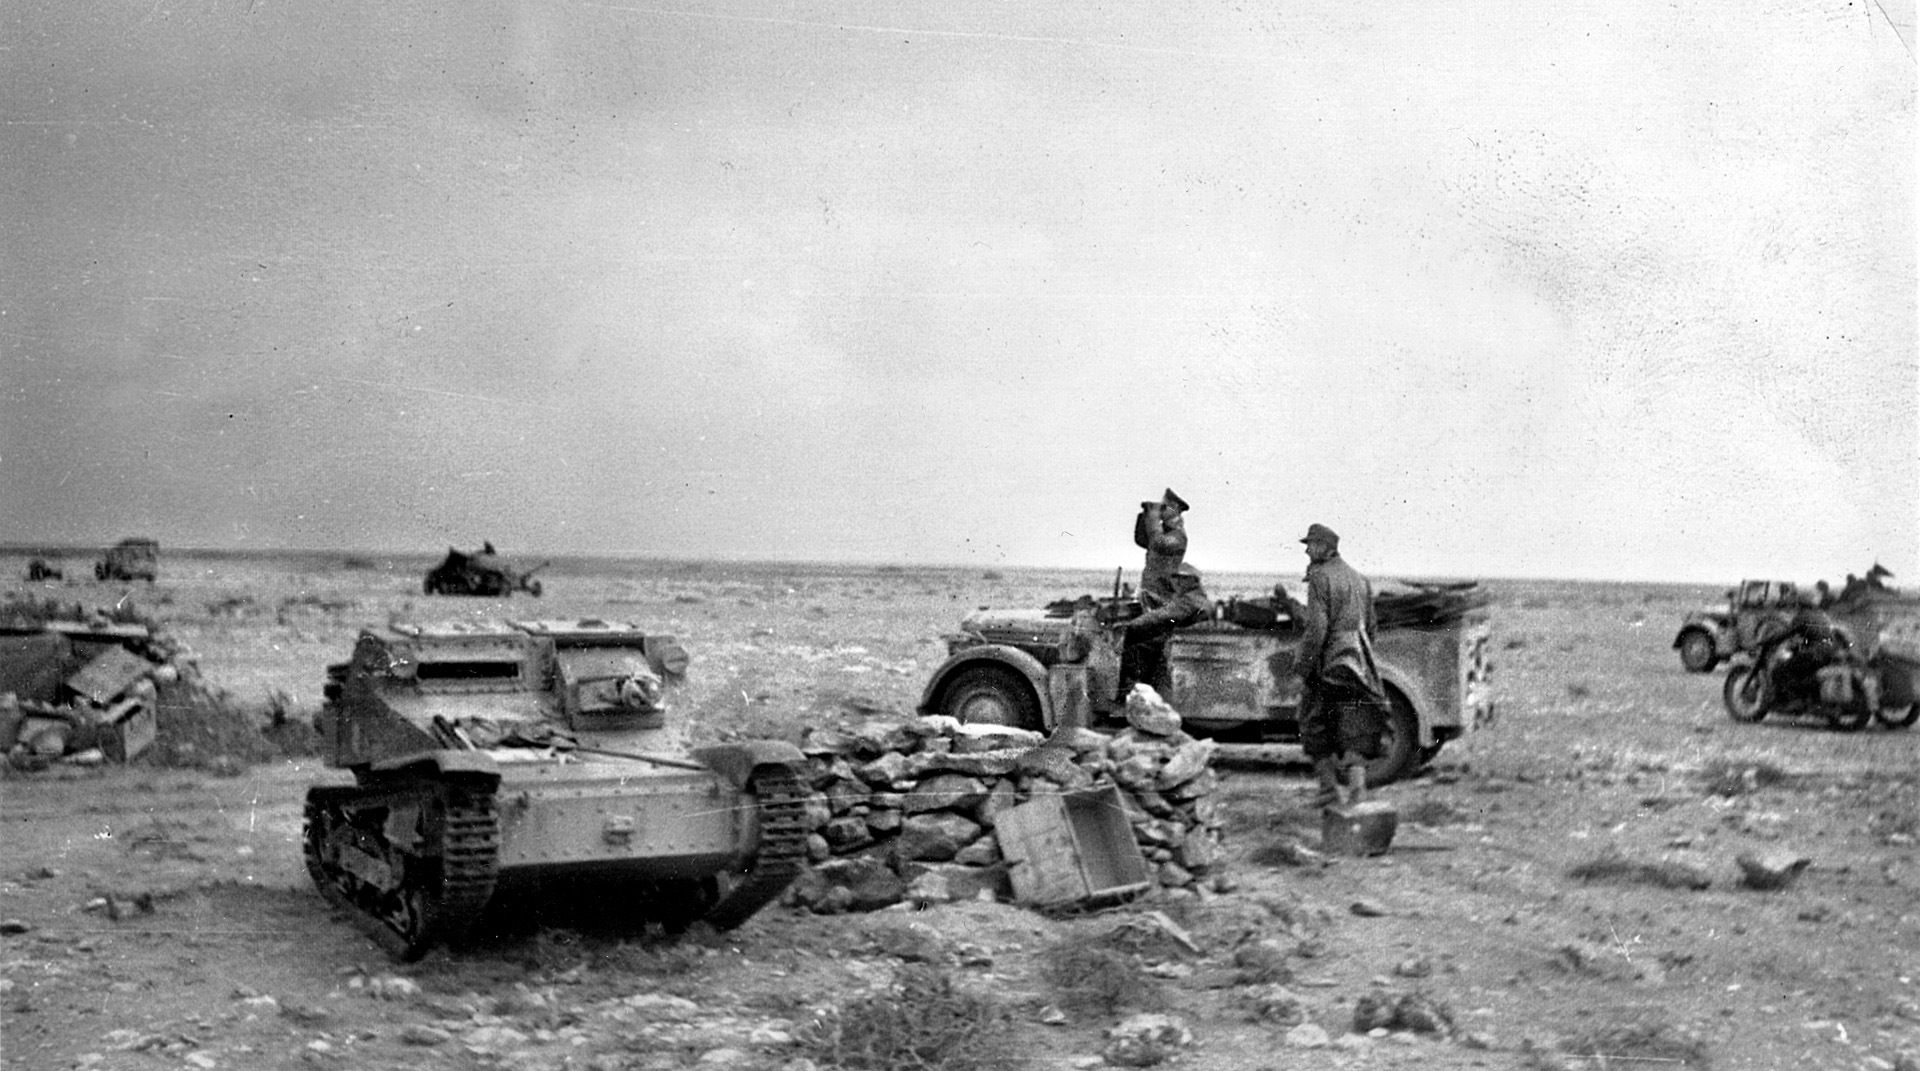 Field Marshal Rommel reconnoiters the battleground from a command vehicle. An abandoned <a href=